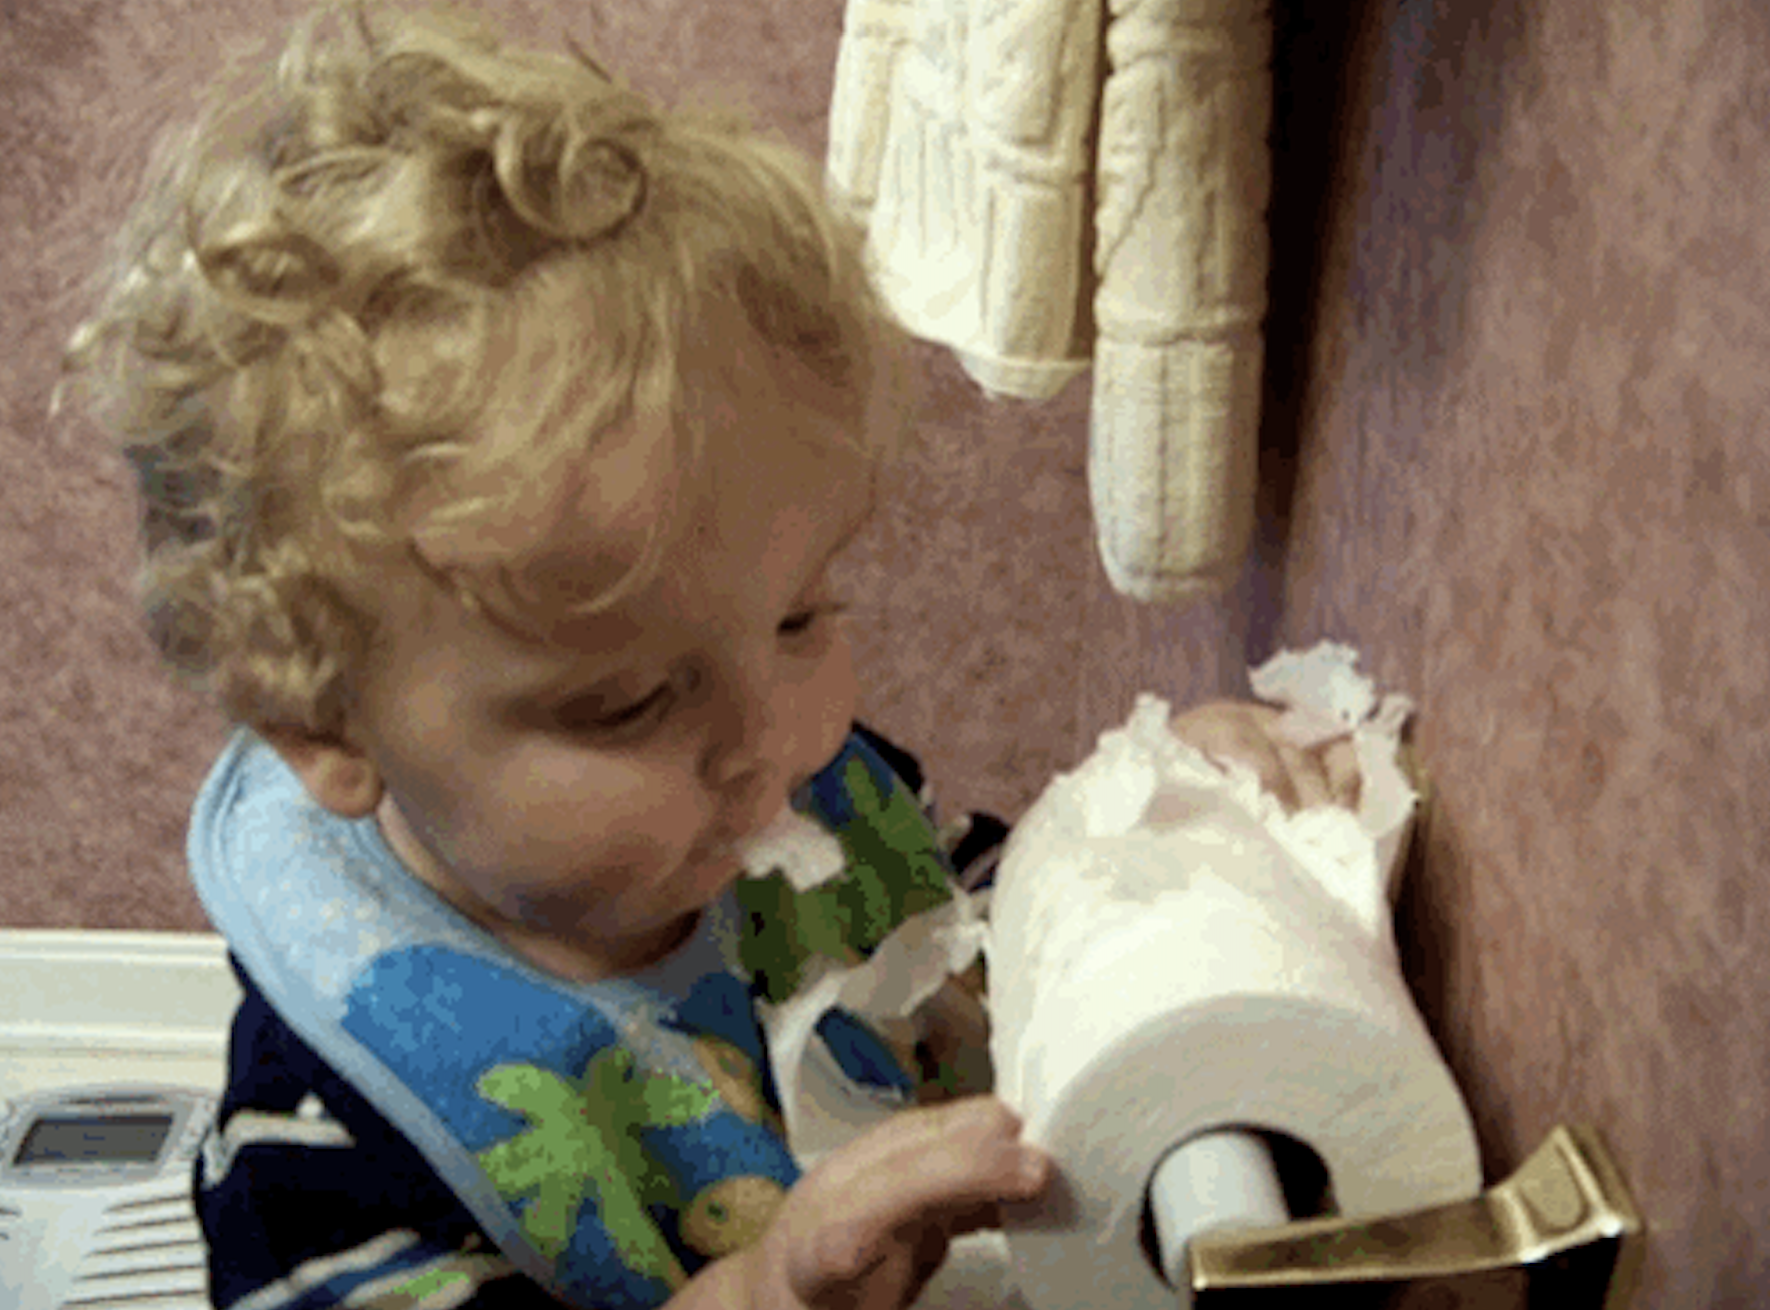 A toddler takes a bite out of a roll of toilet paper